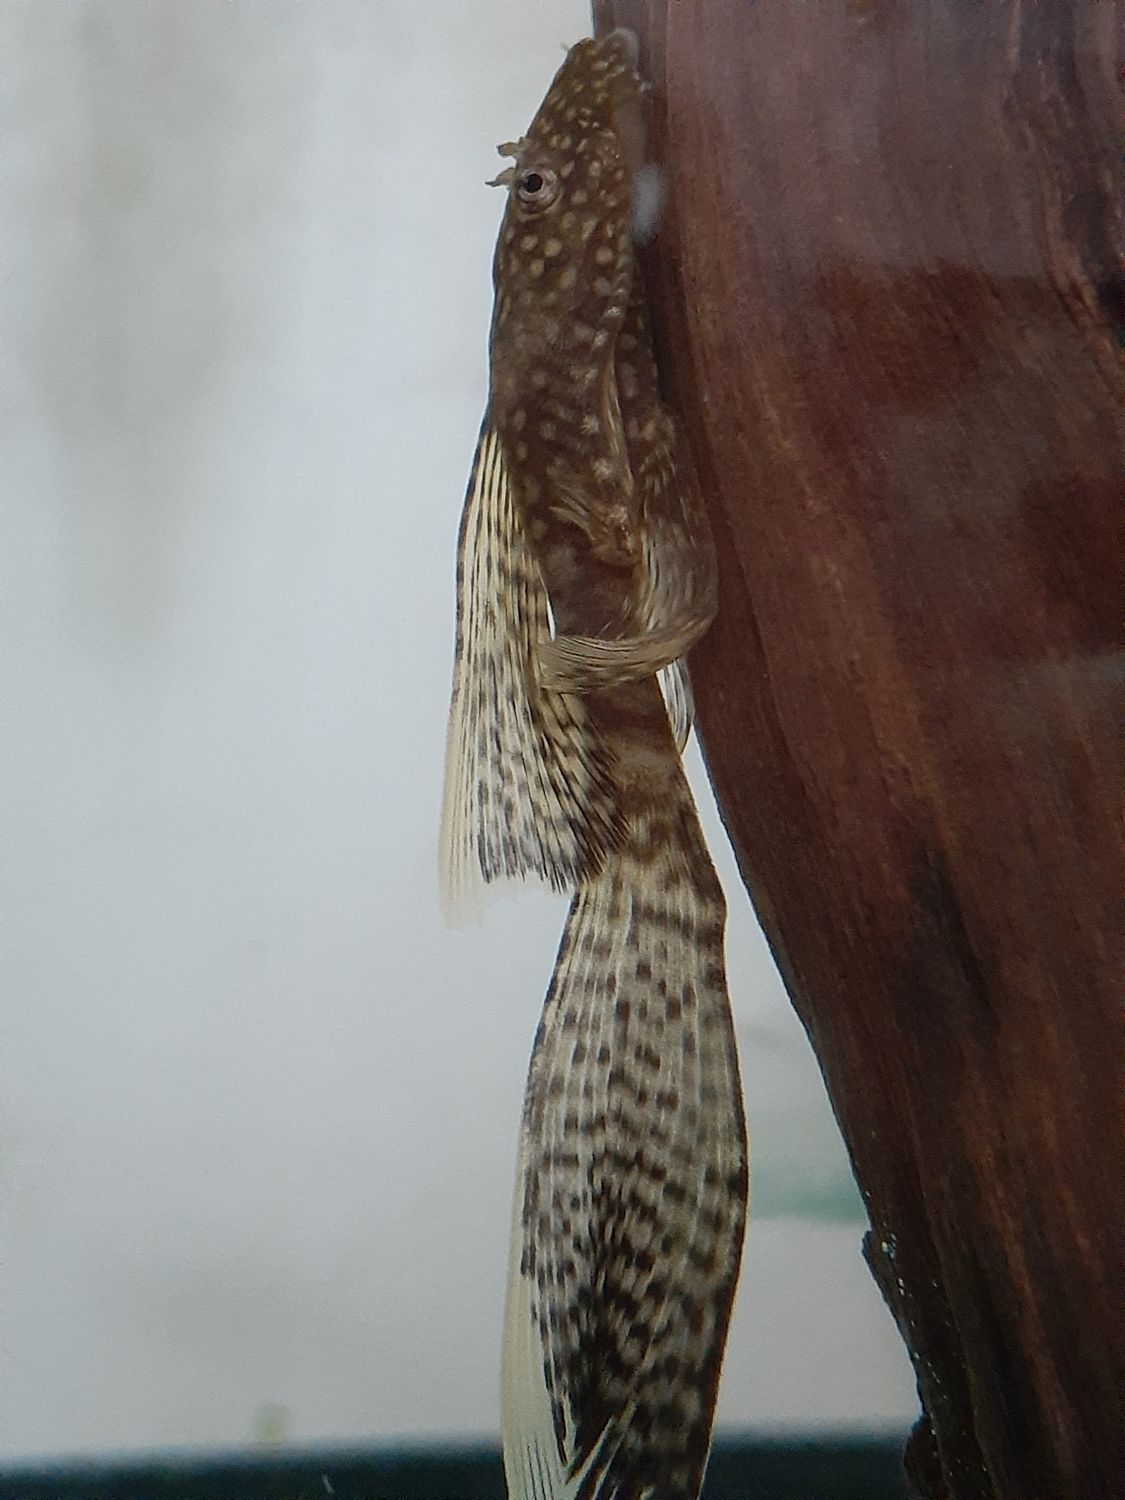 Bristle Nose Longfin Brown Spotted Whitetip pleco, adults 3 + inch unsexed